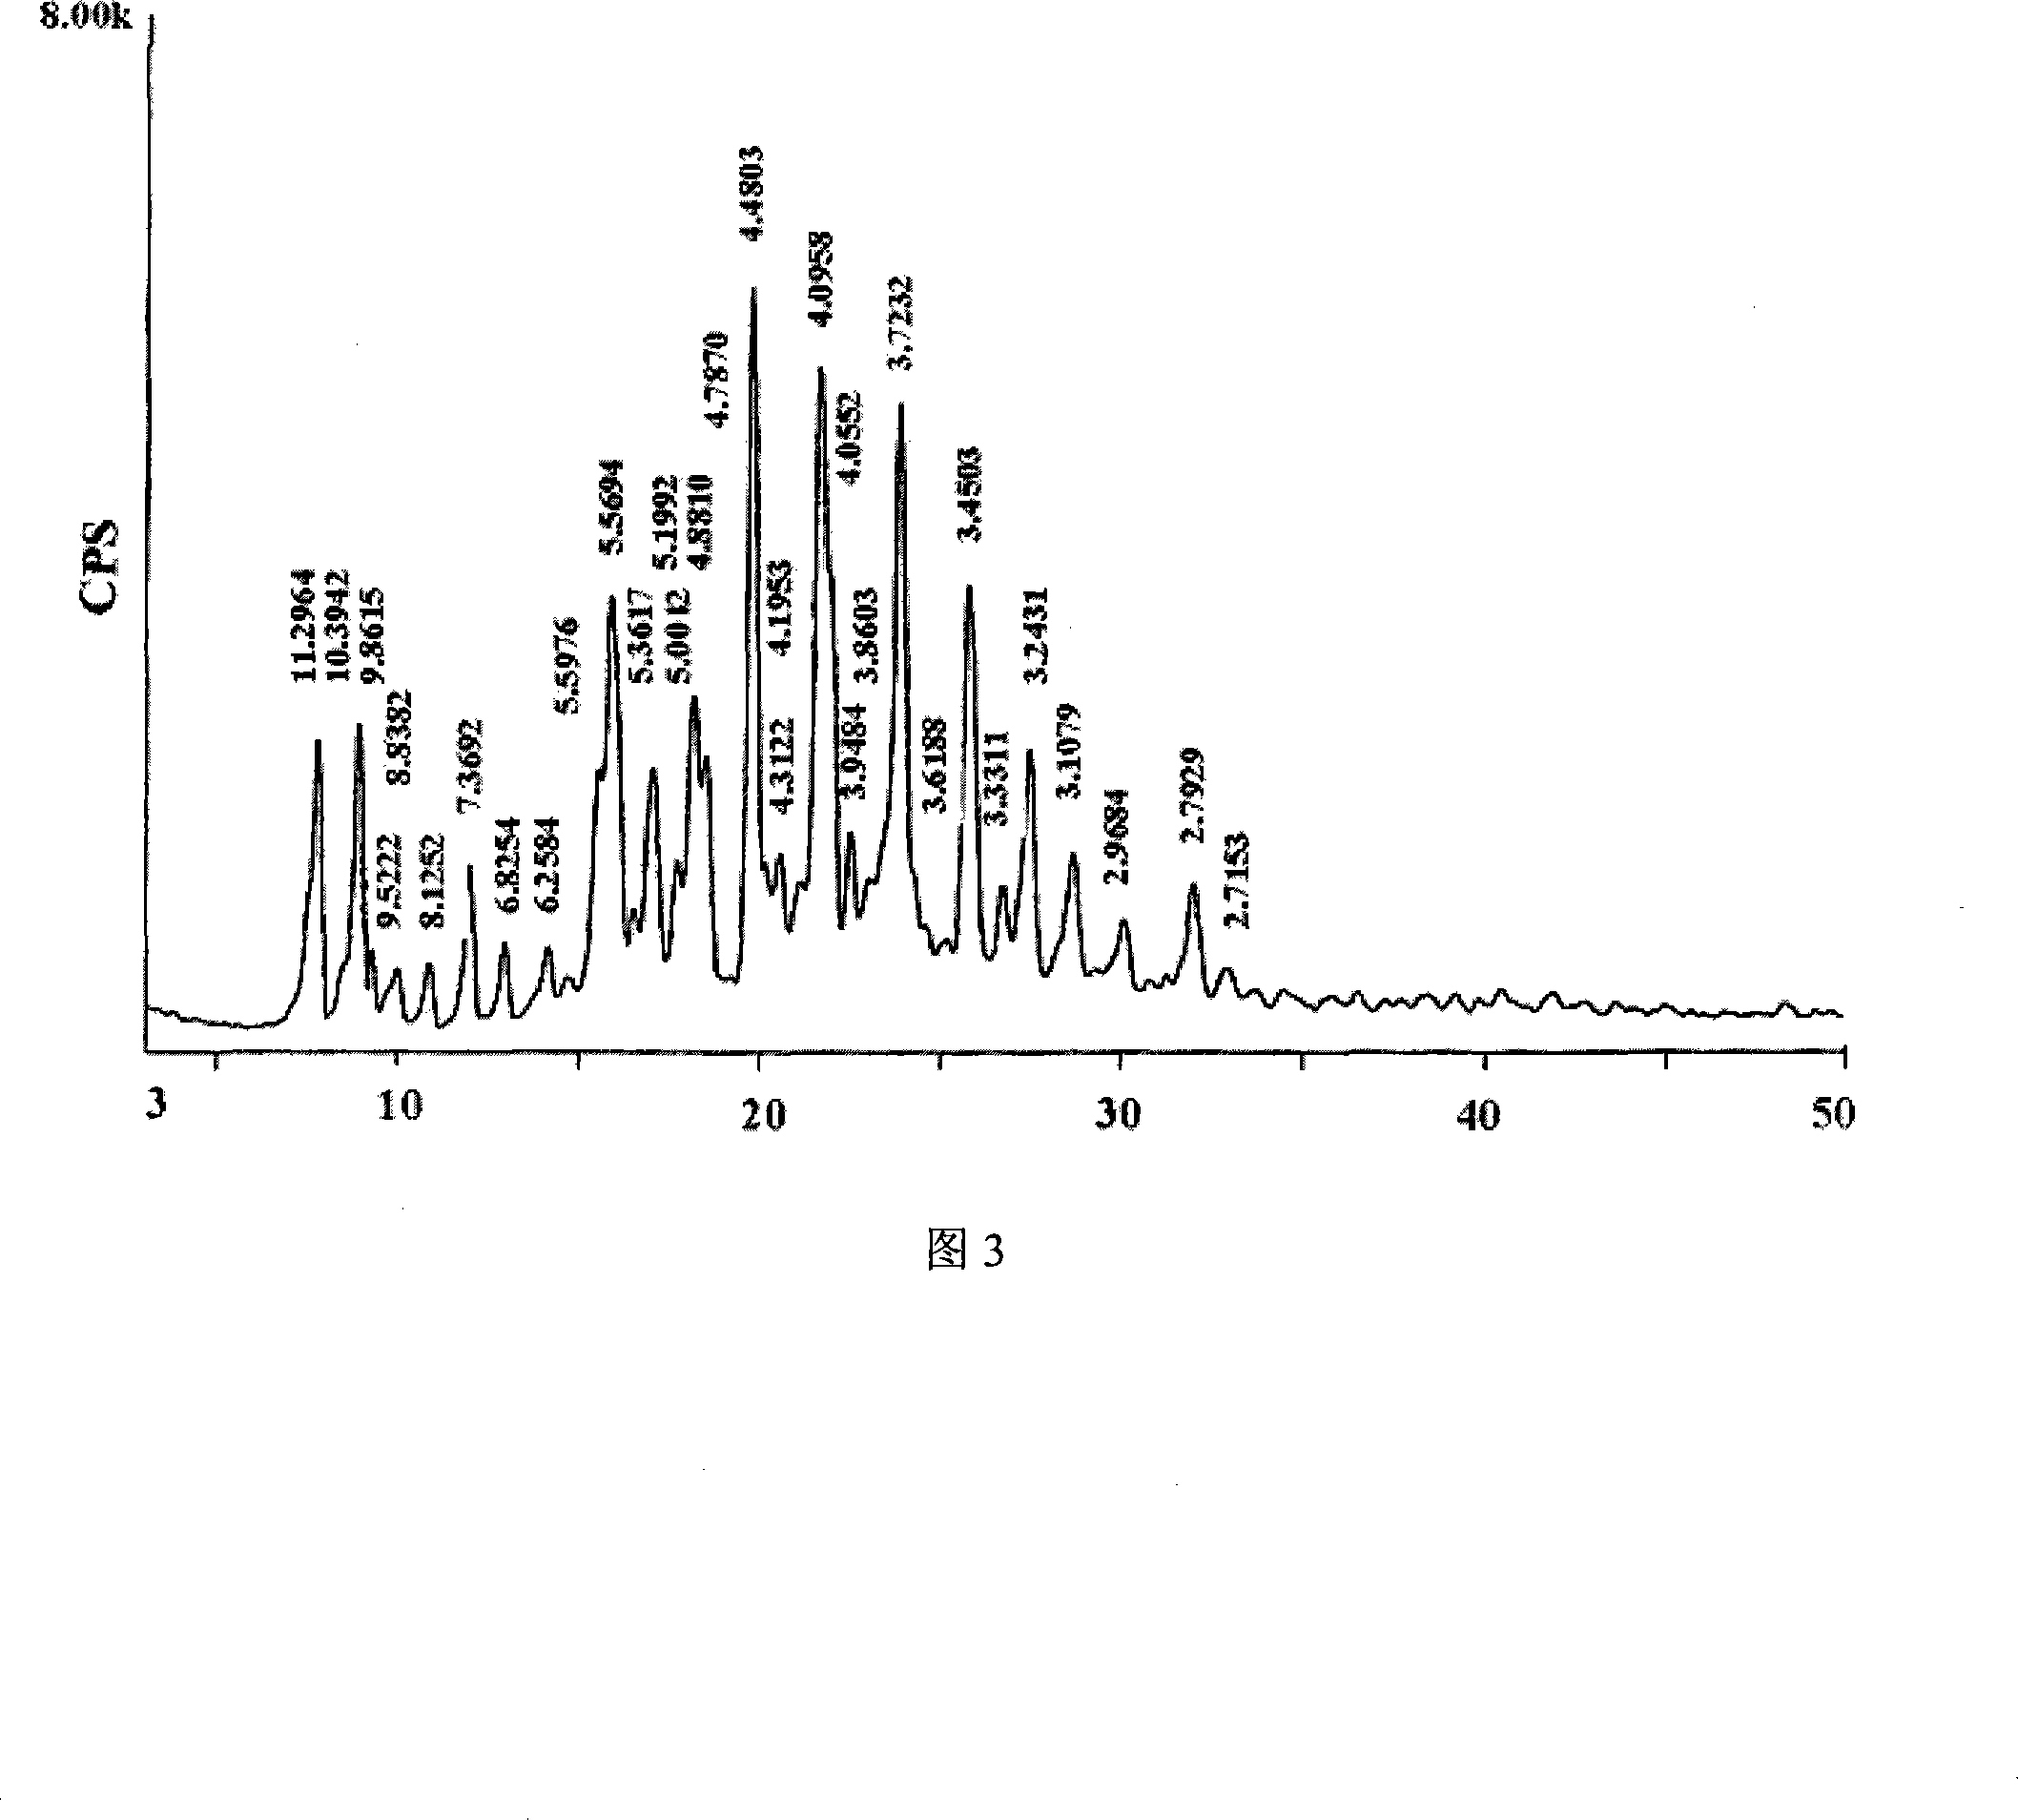 Cinepazide maleate crystal system and method for making same